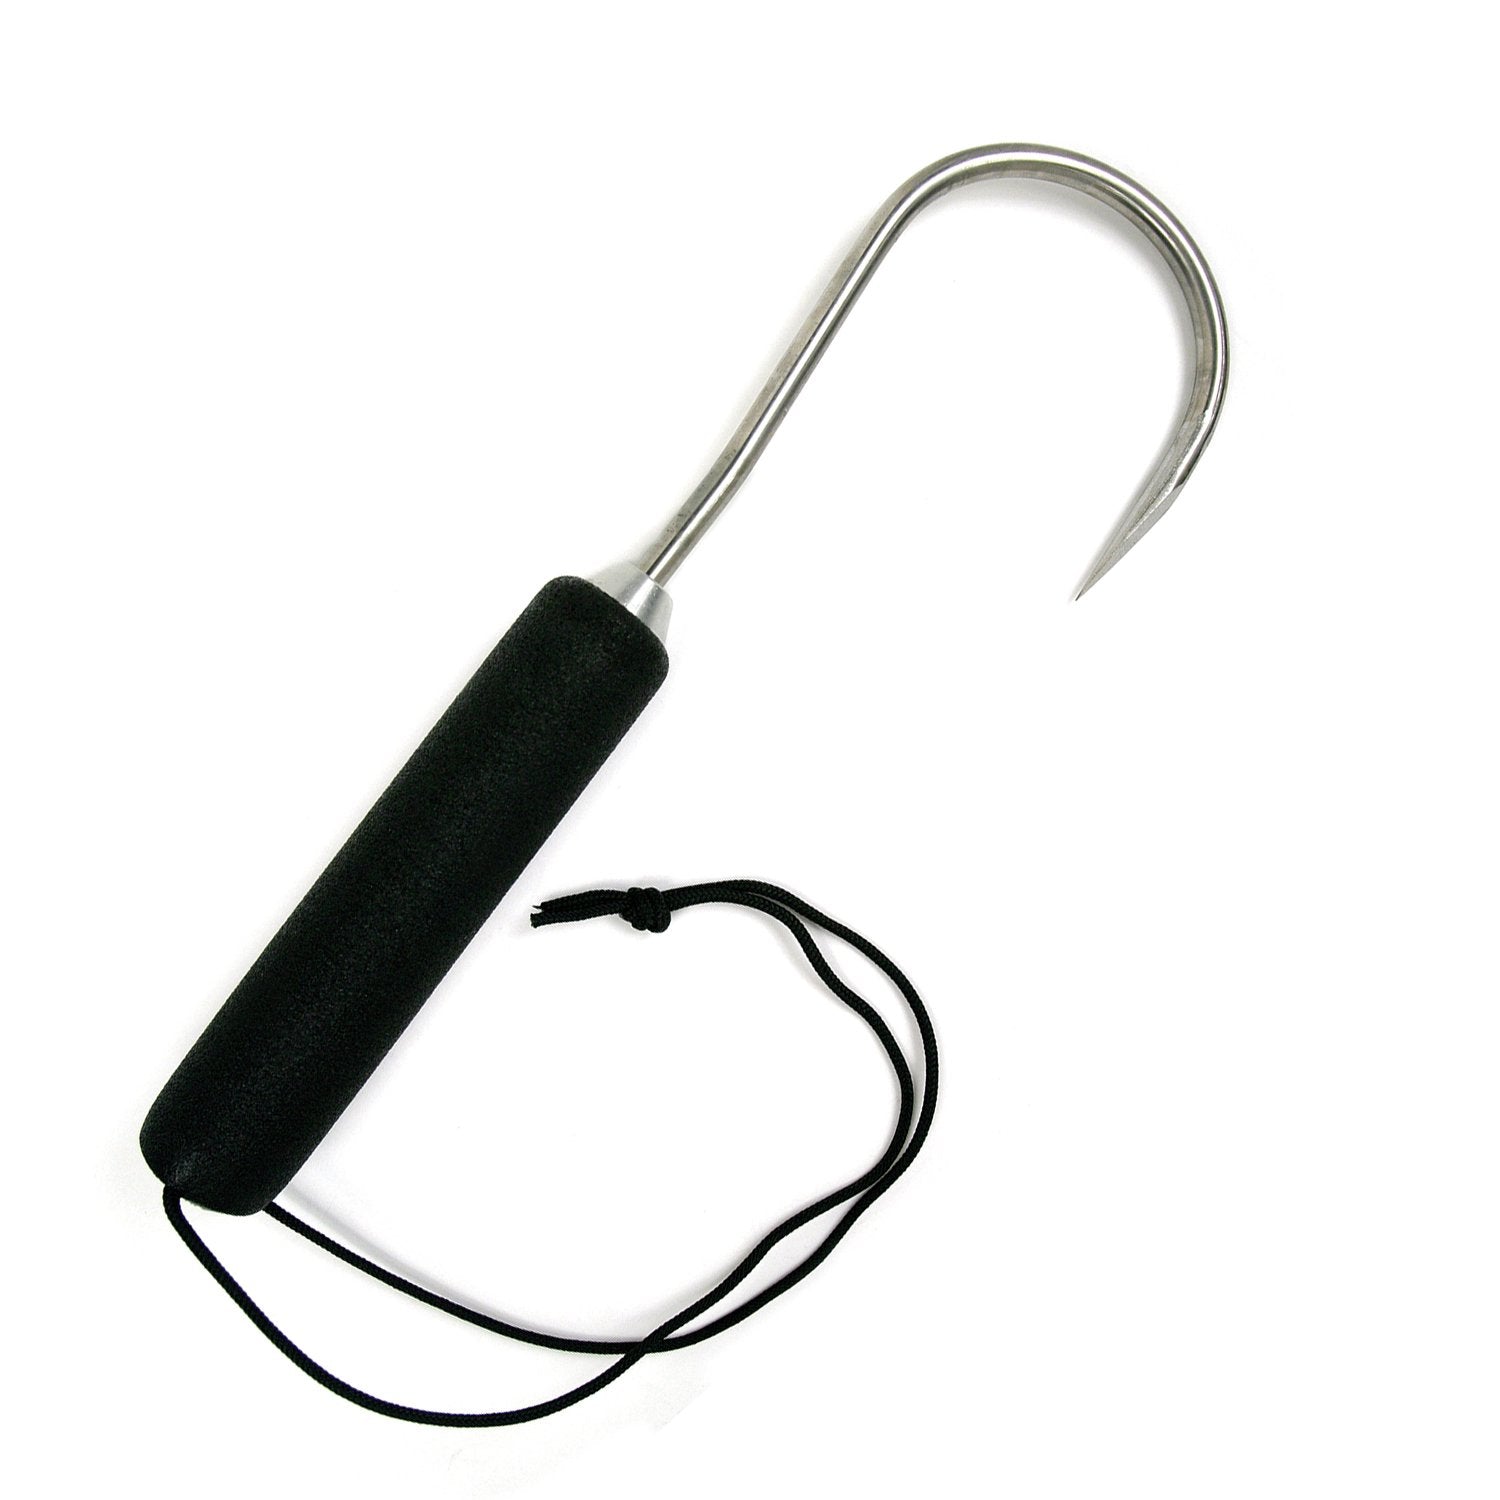 Hand Gaff,Retractable Fishing Gaff Stainless Fishing Gaff Hook